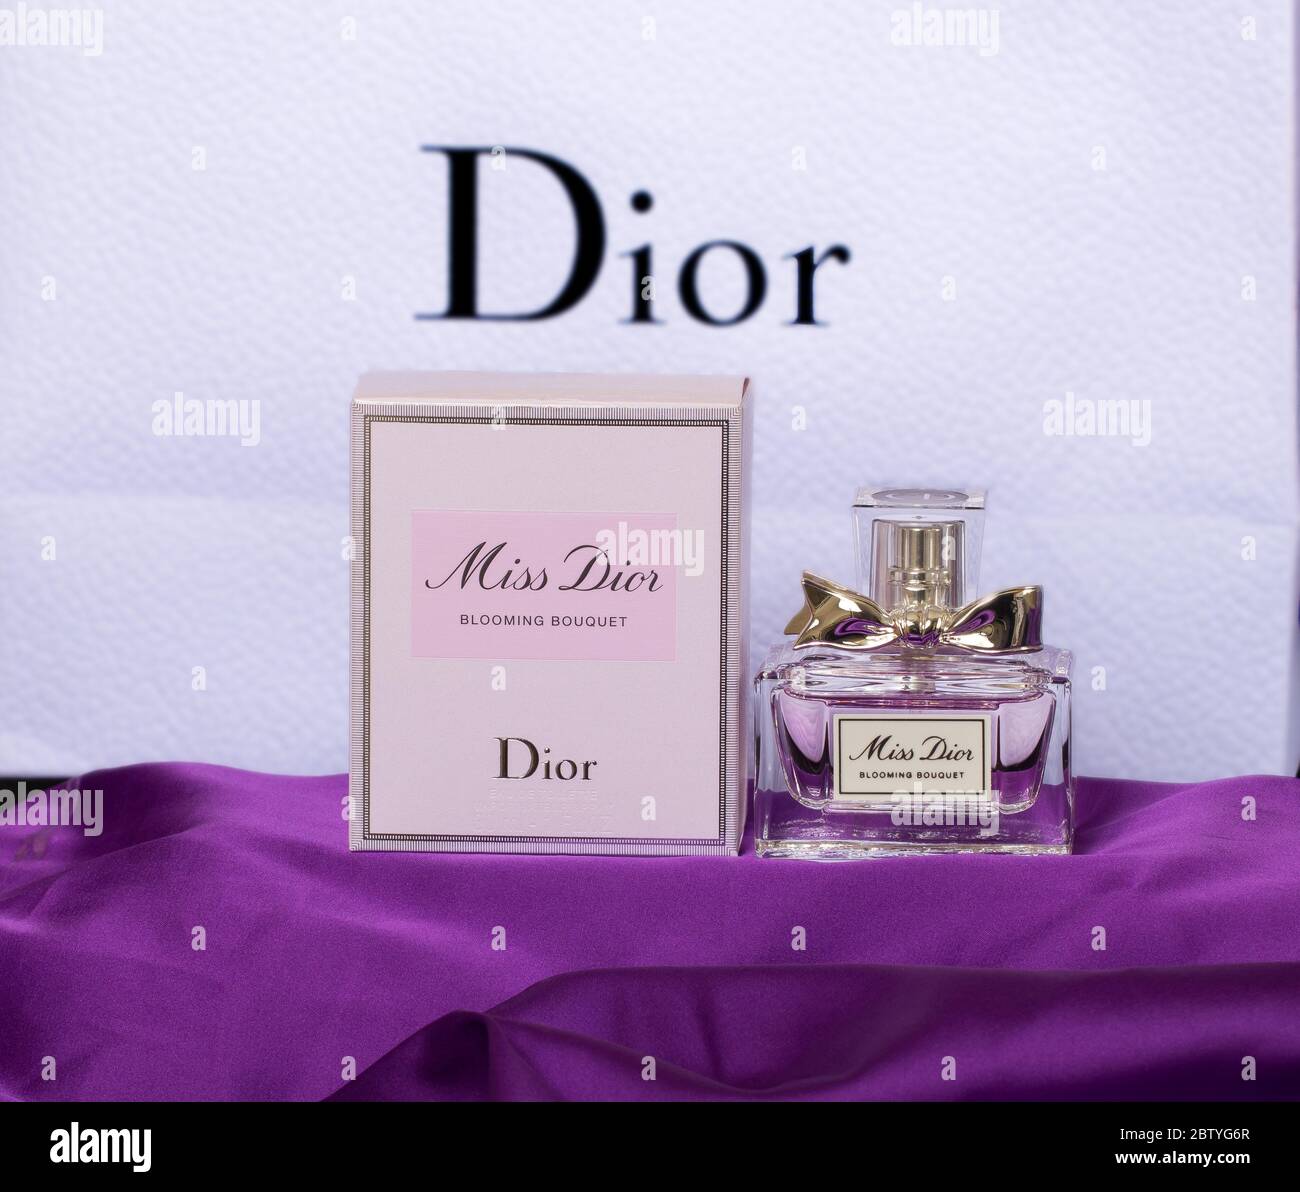 Dior: Miss Dior Blooming Bouquet Stock Photo